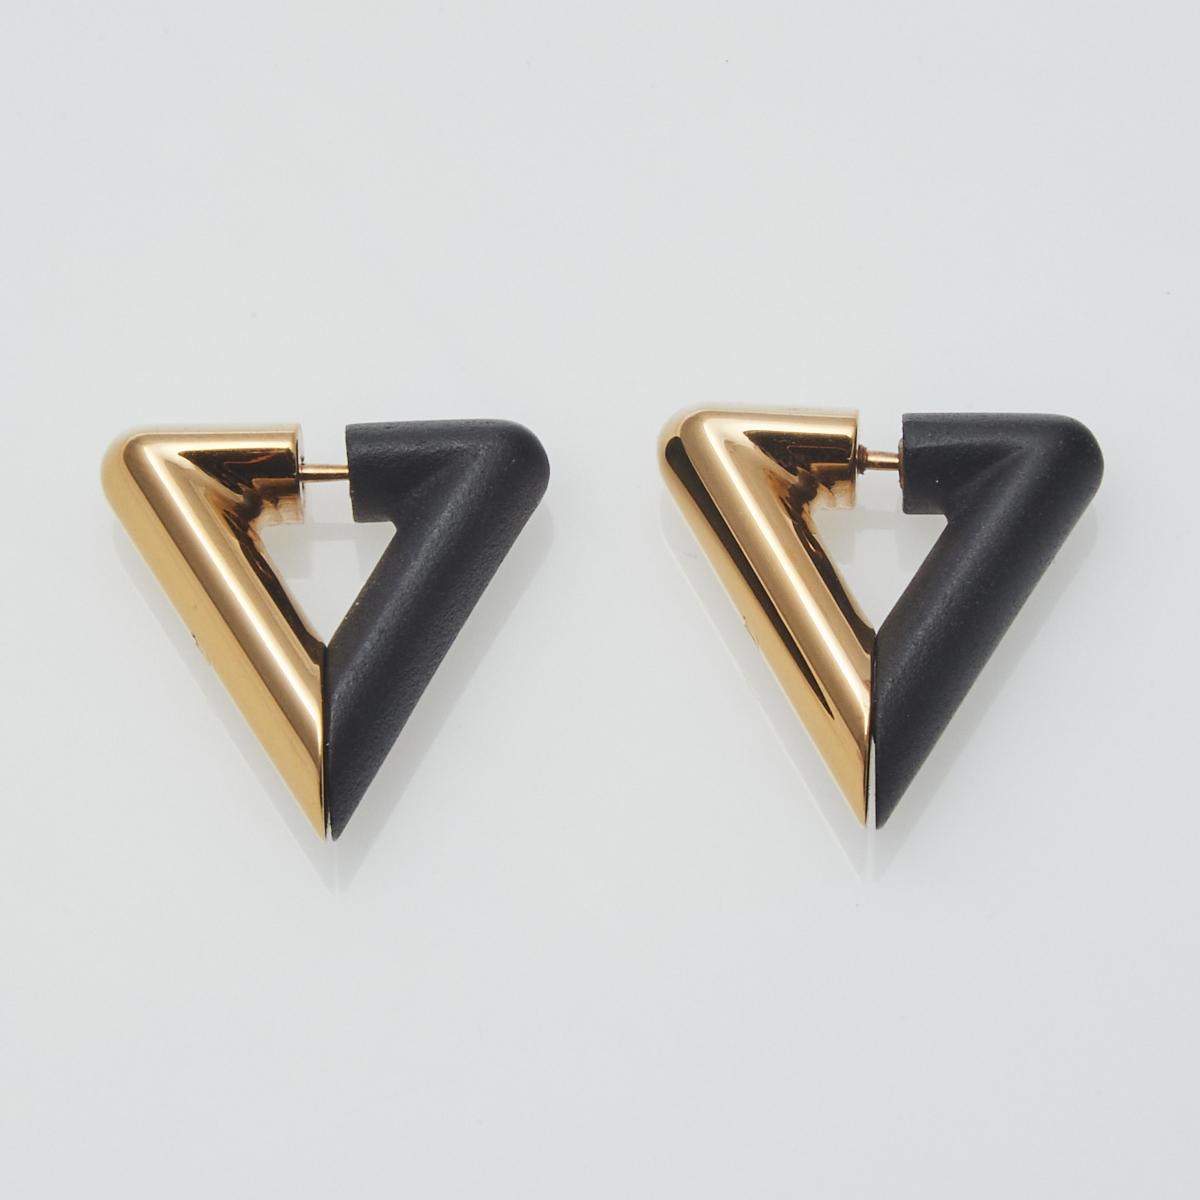 LOUIS VUITTON LOUIS VUITTON Studs Earring Essential V Pierced Gold Plated  Used women LV M68153Product Code2118400029212BRAND OFF Online Store